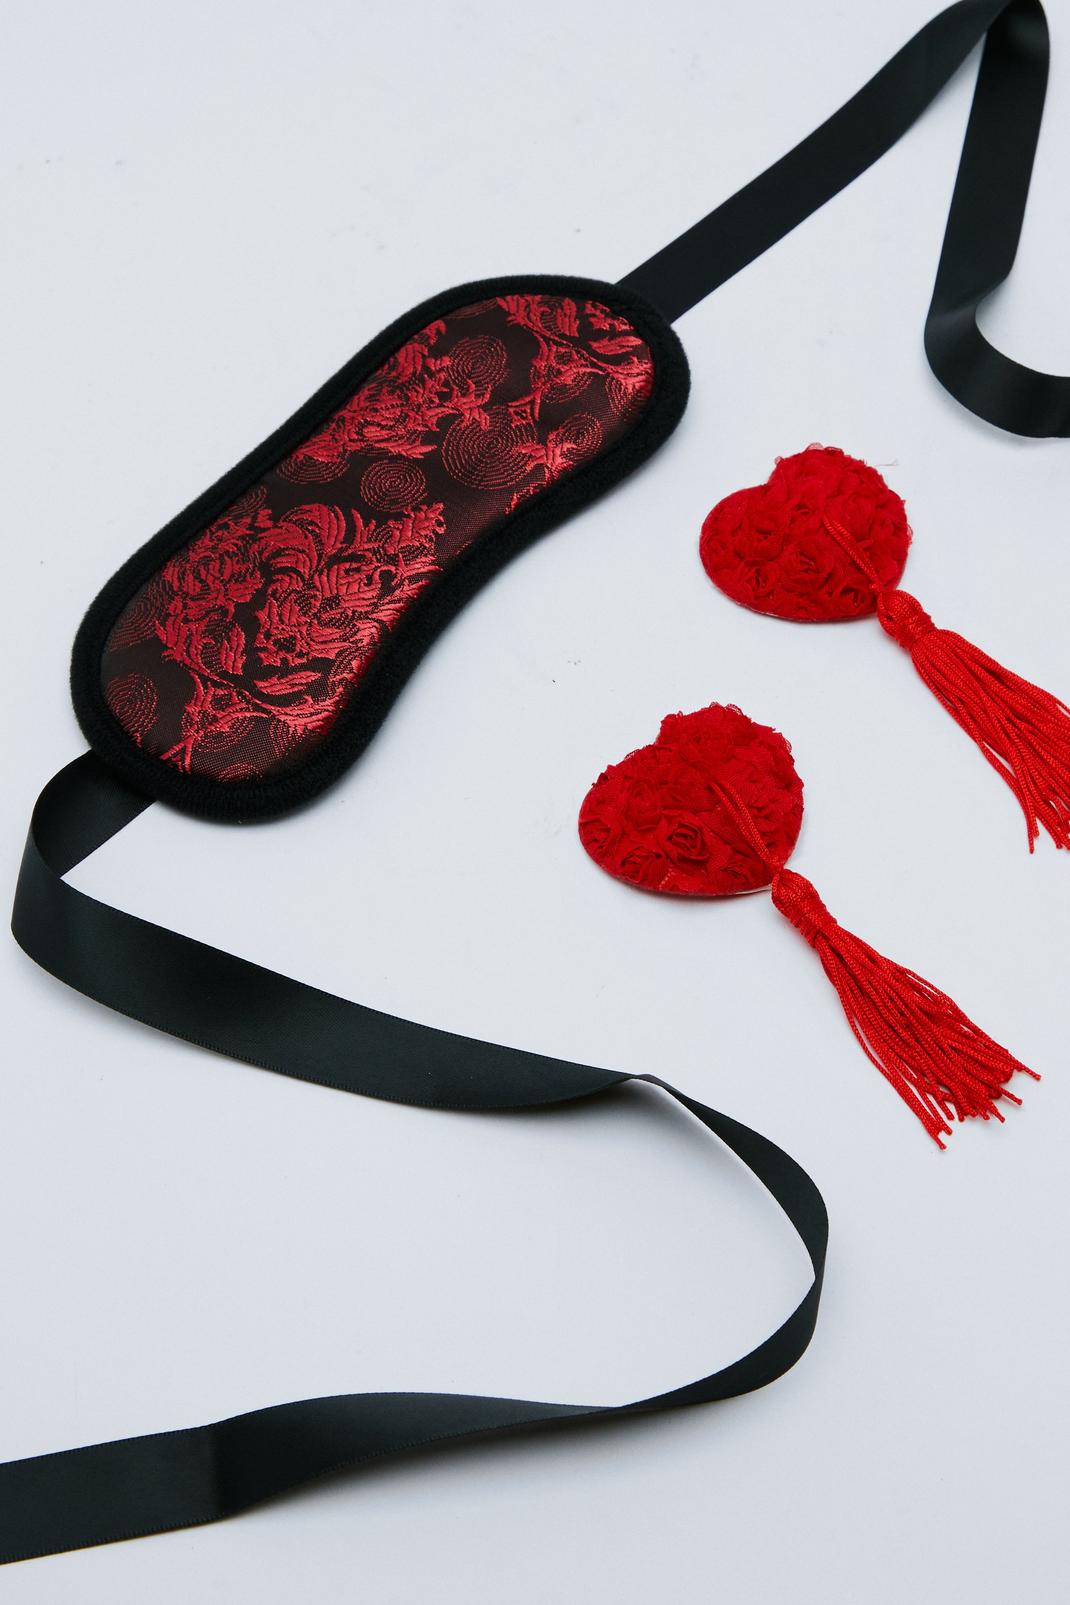 https://media.nastygal.com/i/nastygal/bgg12631_red_xl/female-red-rose-nipple-pasties-and-matching-eye-mask/?w=1070&qlt=default&fmt.jp2.qlt=70&fmt=auto&sm=fit